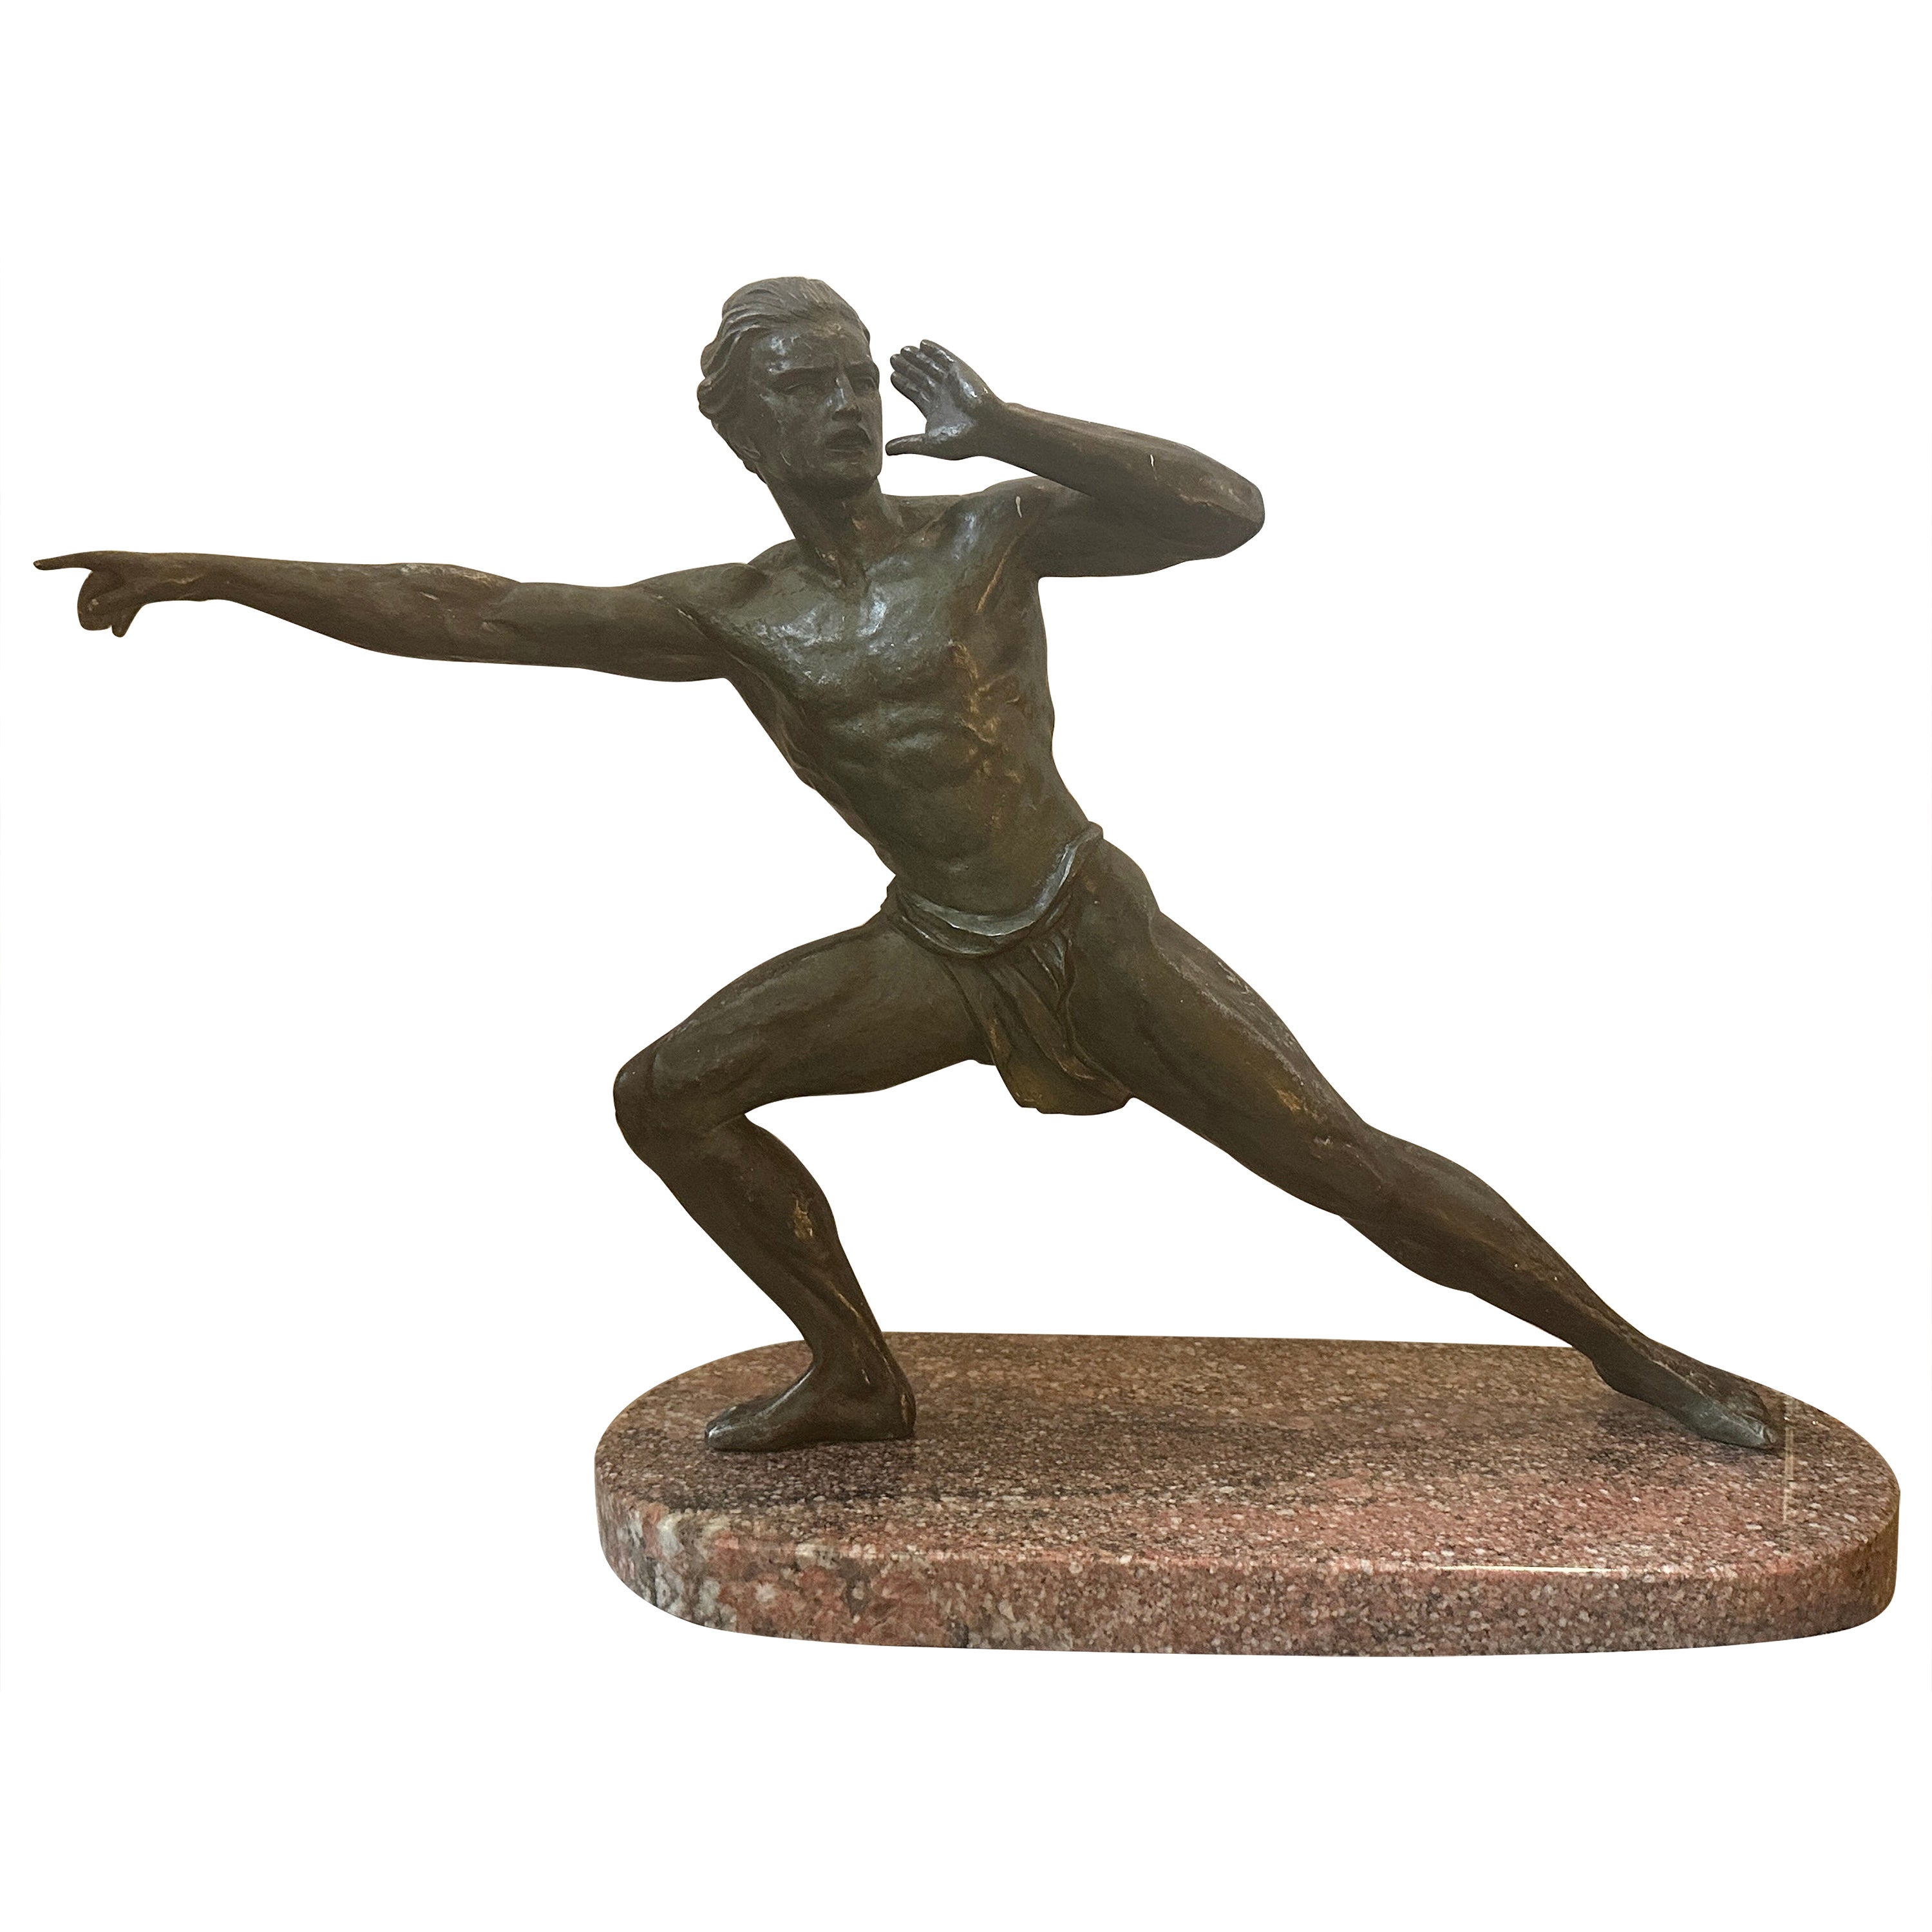 1930s Art Deco Antimony and Marble Sculpture of an Athlete by Jean De Roncourt For Sale